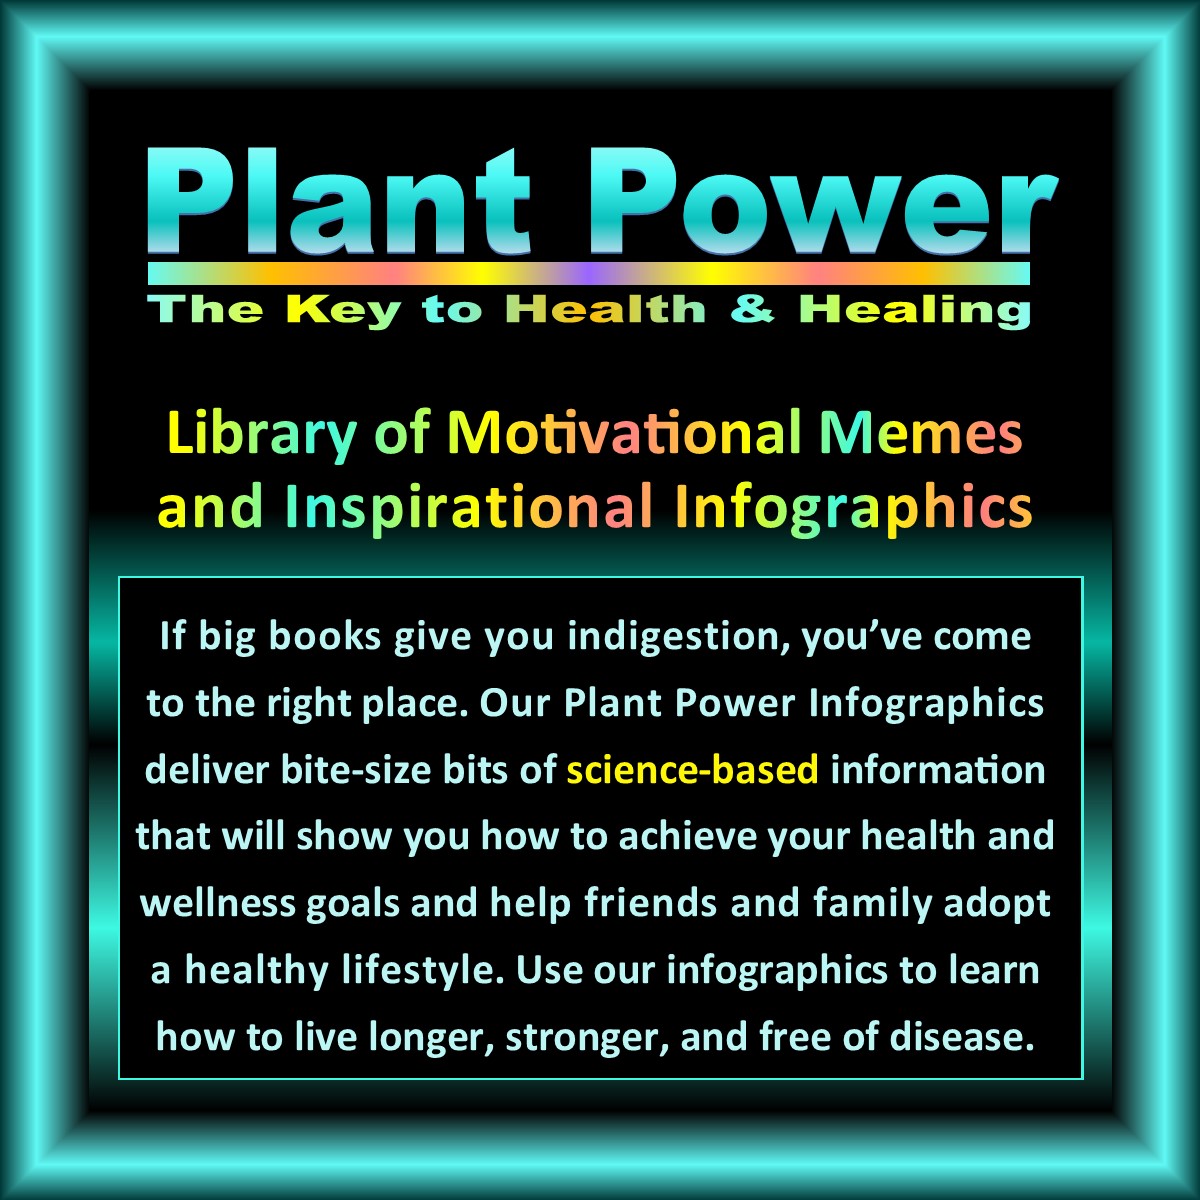 Plant Power Library by Ron Krebs